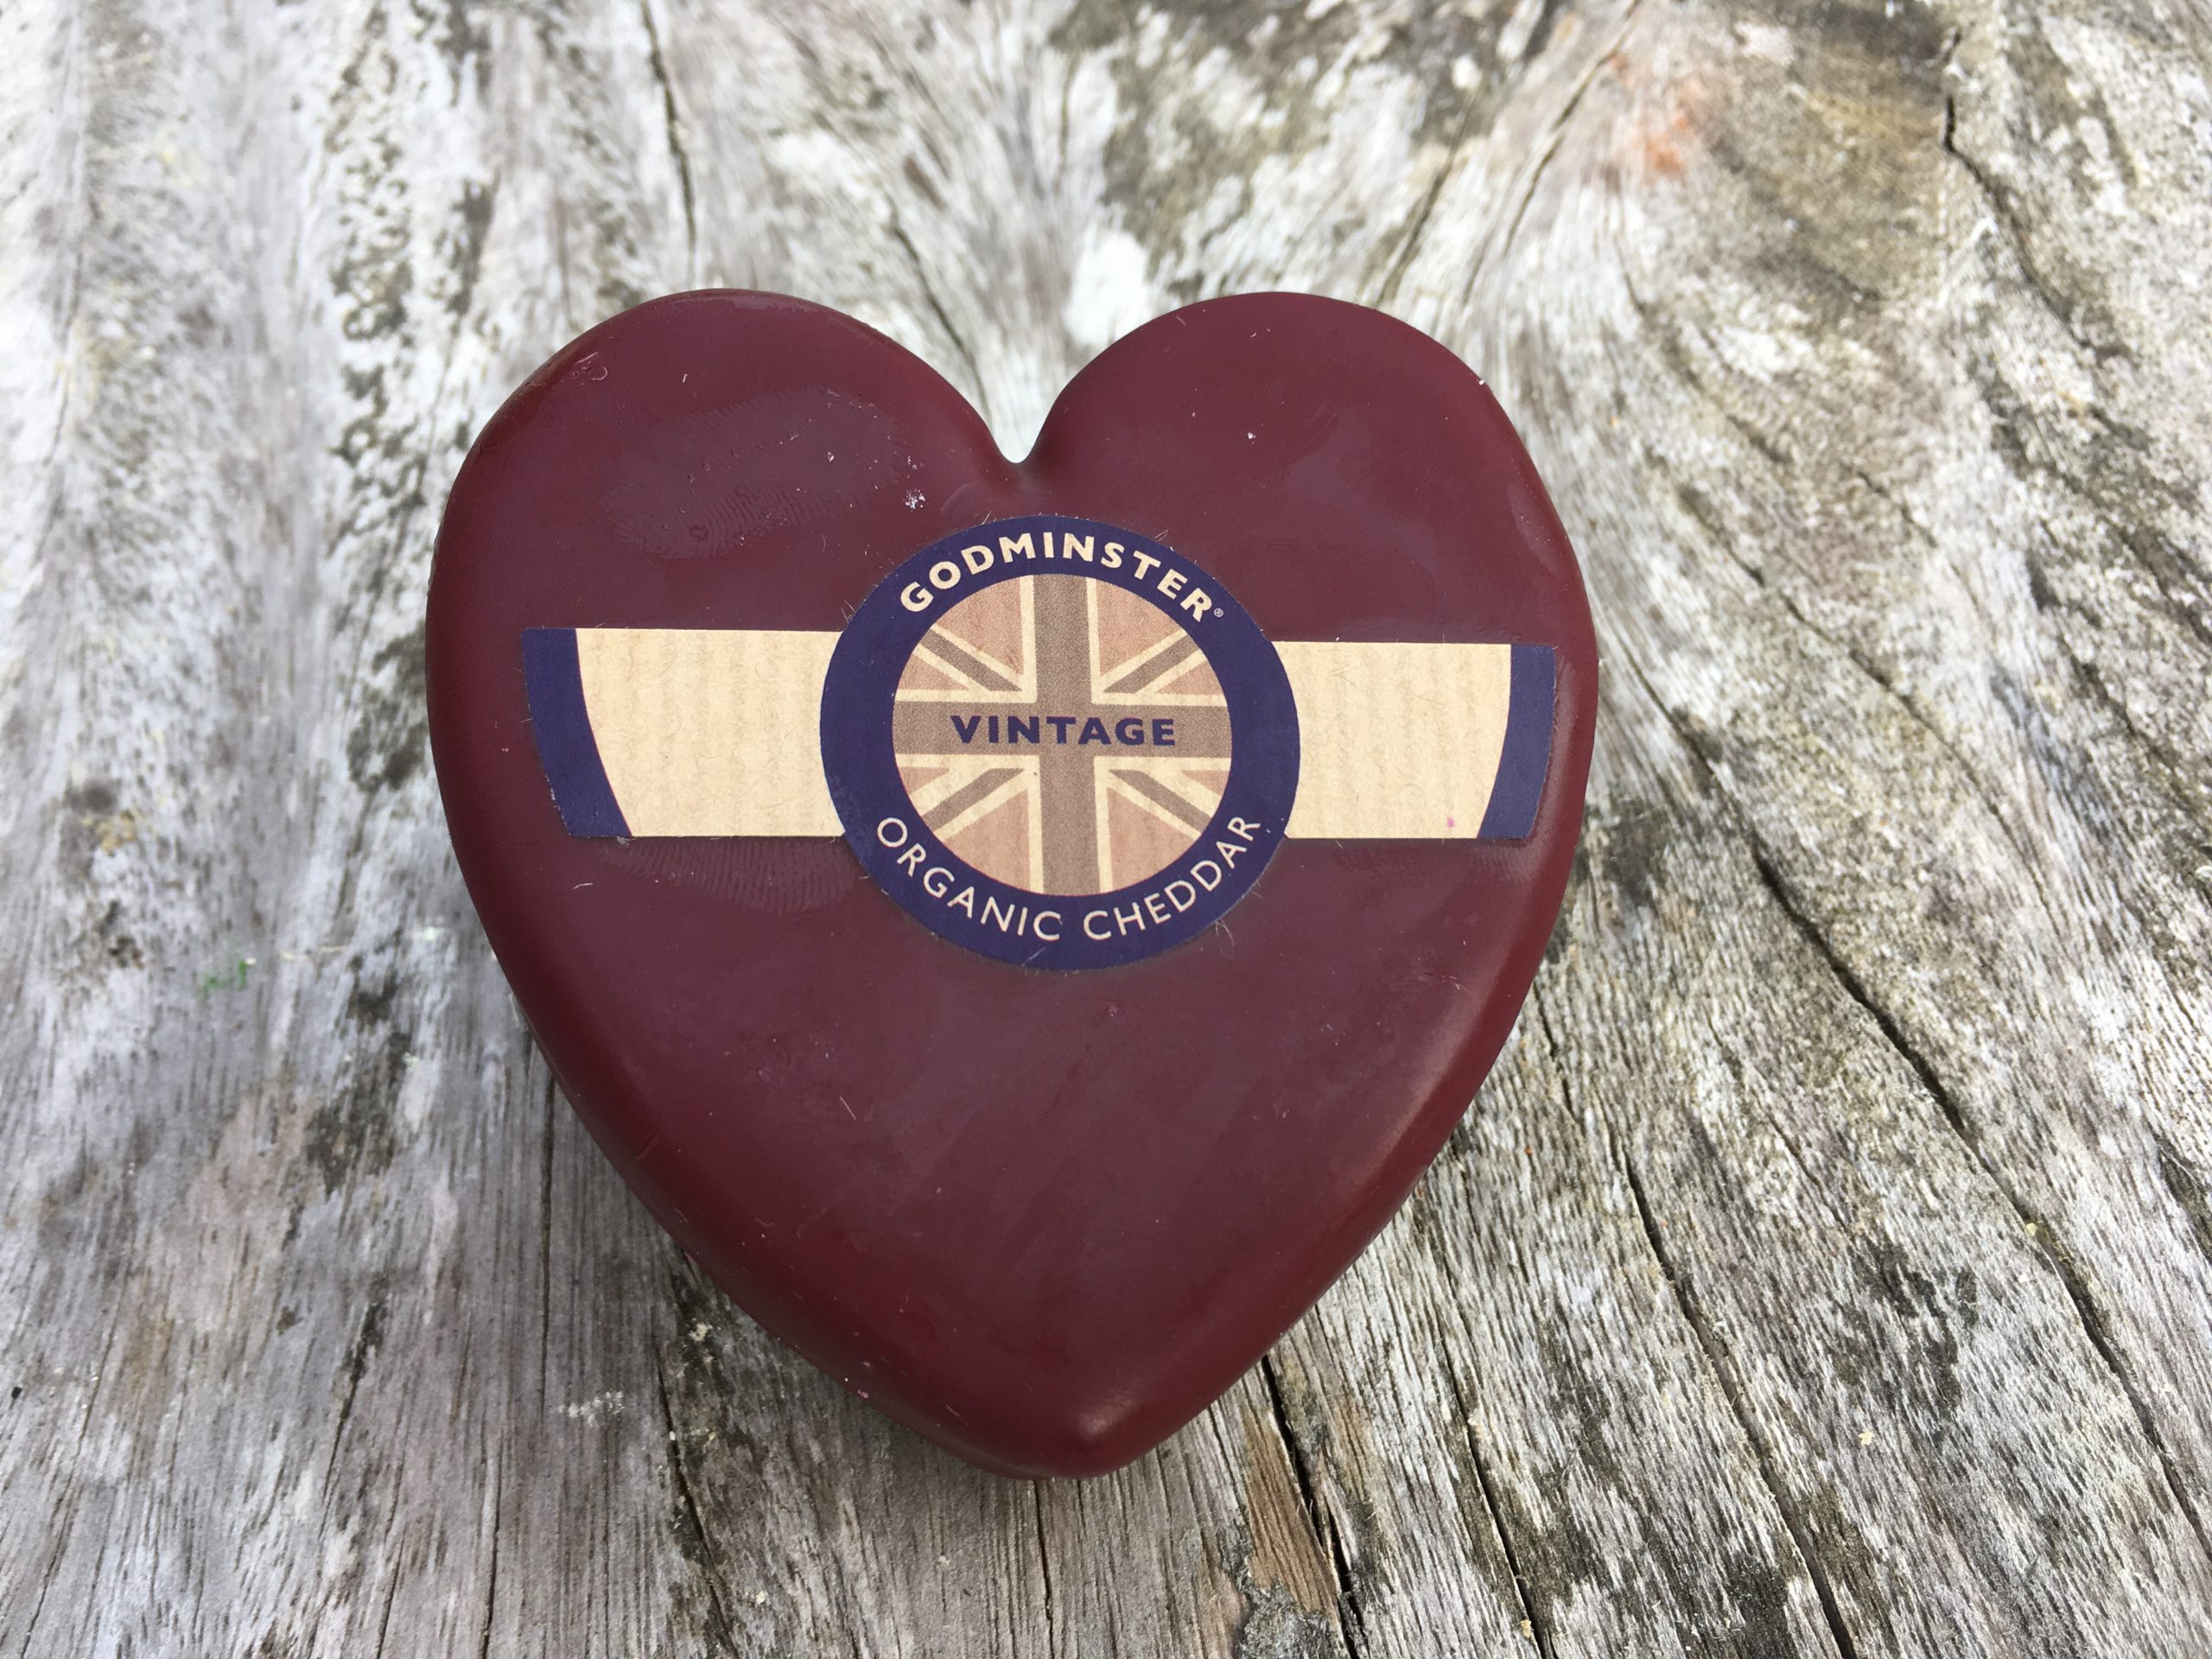 Godminster Heart Cheddar Cheese